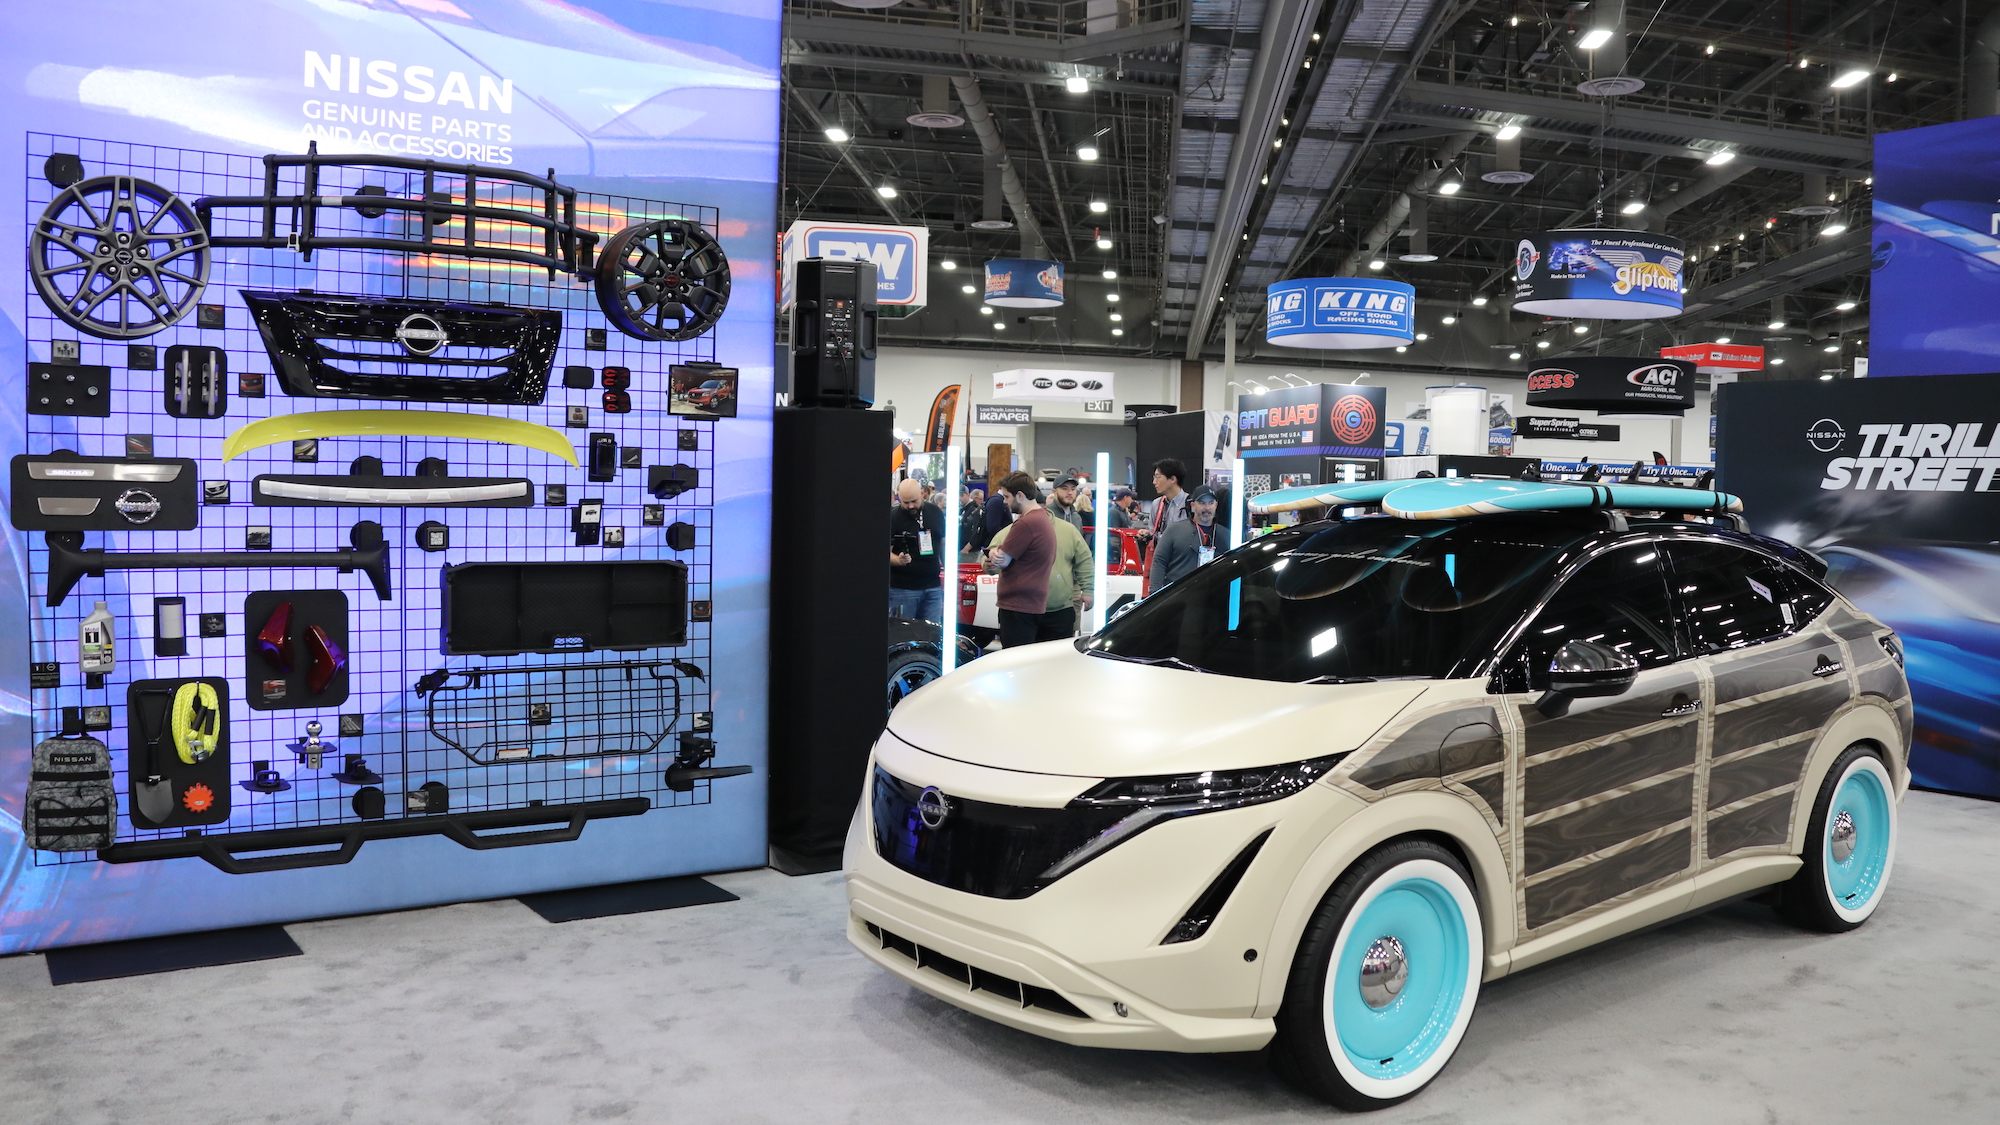 Nissan car and car parts at the SEMA annual event.